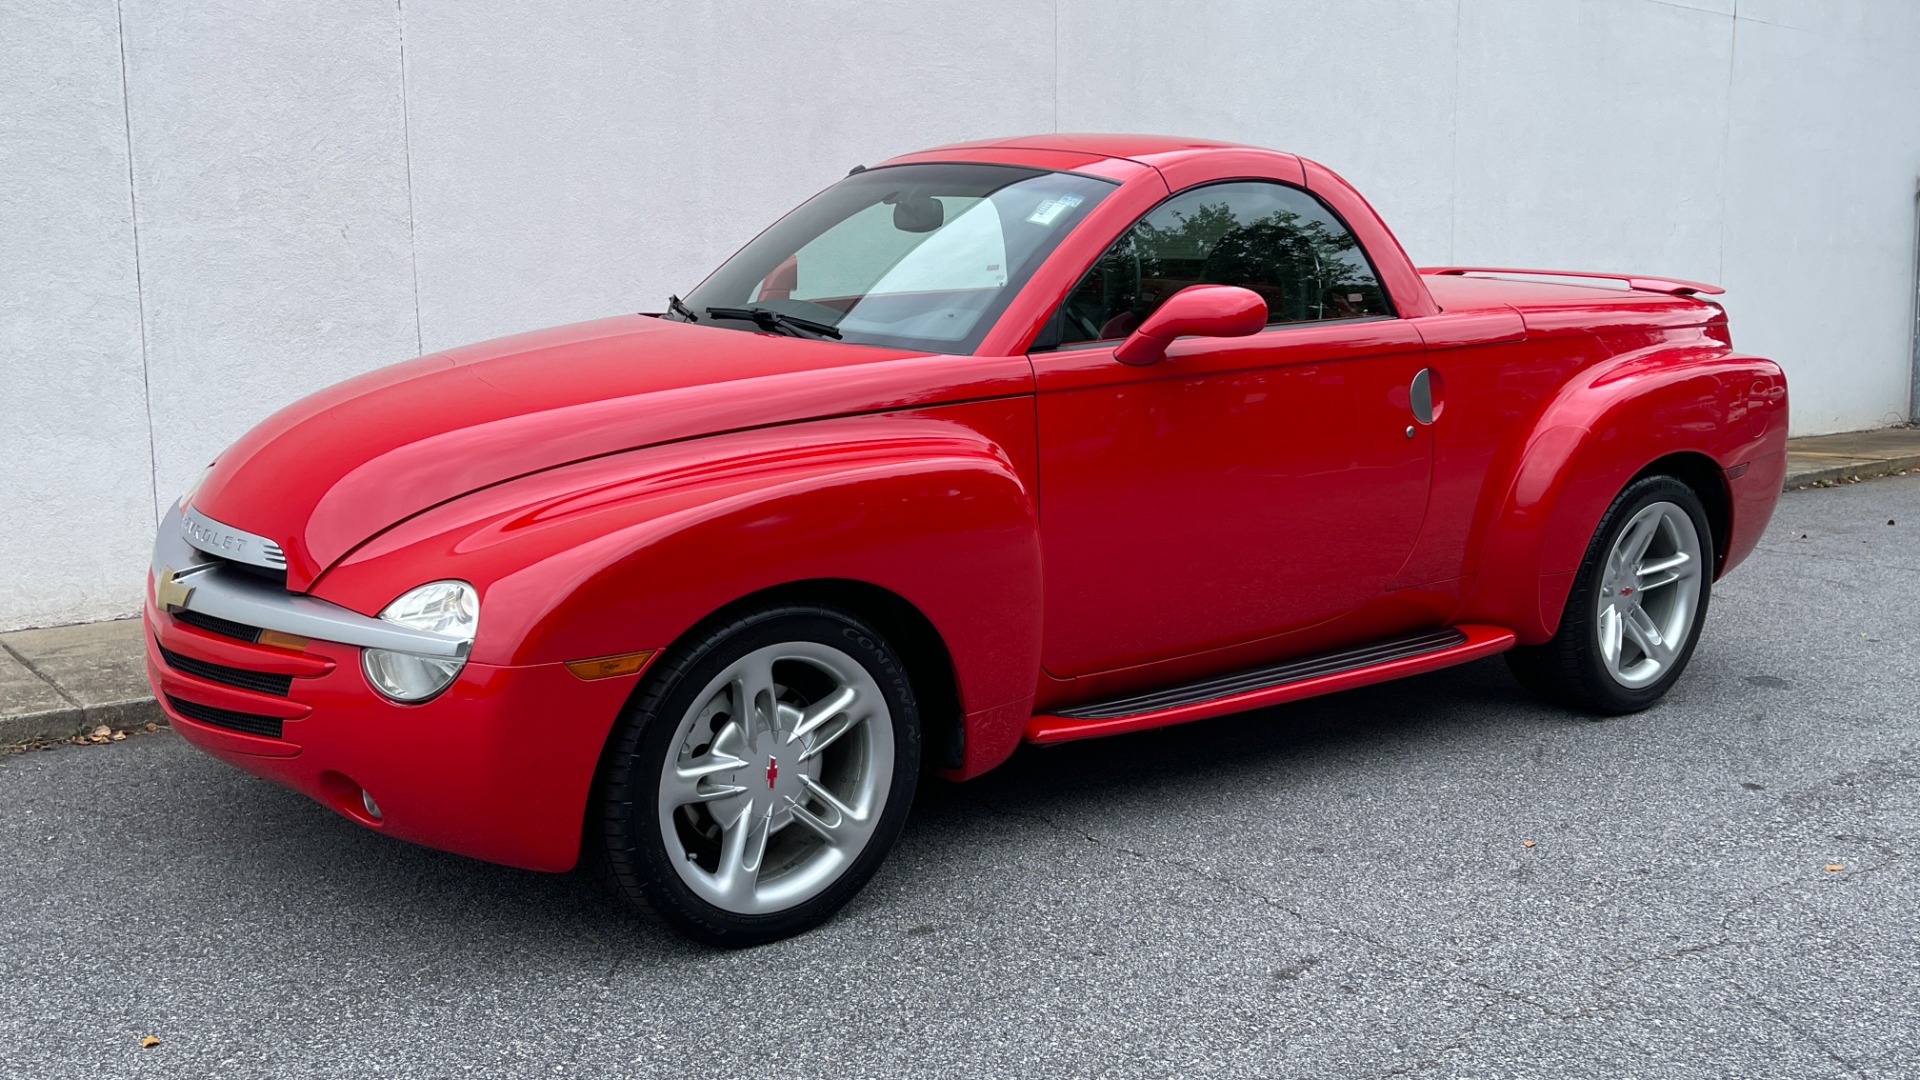 Used 2004 Chevrolet SSR LS / CONVERTIBLE / 5.3L V8 / LEATHER / HEATED SEATS / BACKUP CAMERA for sale $19,995 at Formula Imports in Charlotte NC 28227 44